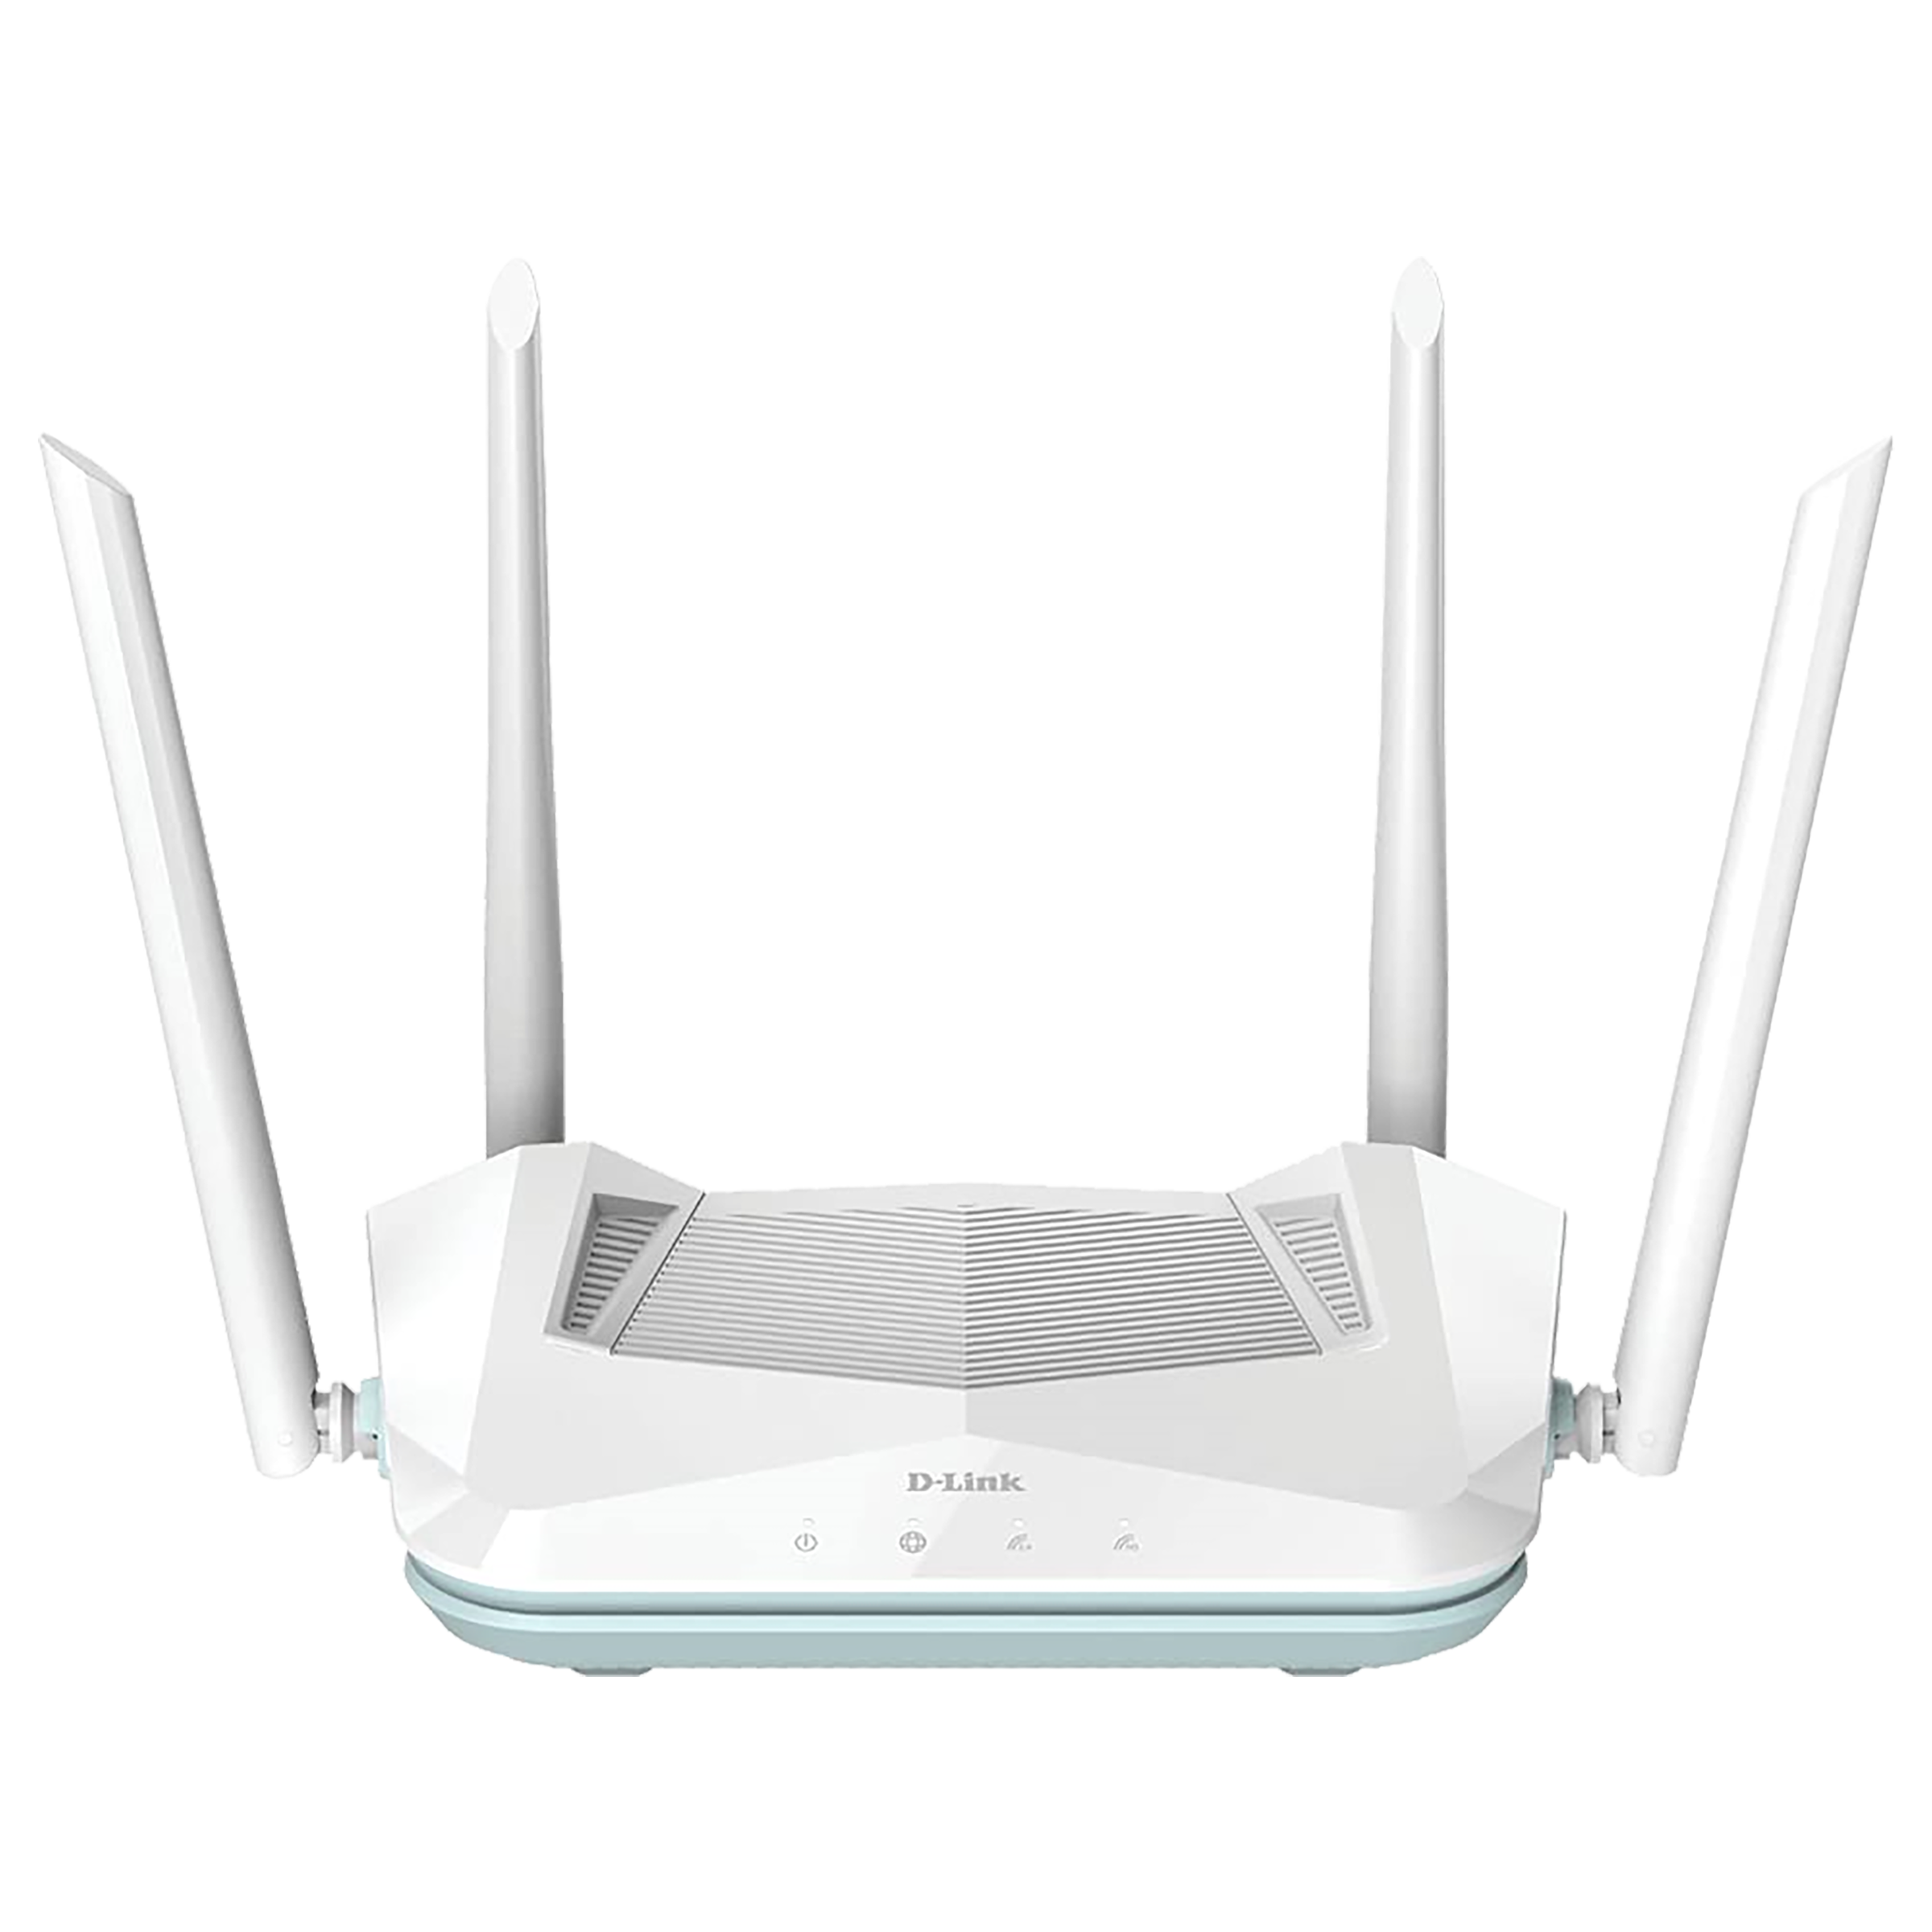 D-Link - D-Link AX1500 Dual Band 1201 Mbps WiFi Router (4 Antennas, 3 LAN Ports, Google Assistant And Alexa Supported, R15, White)